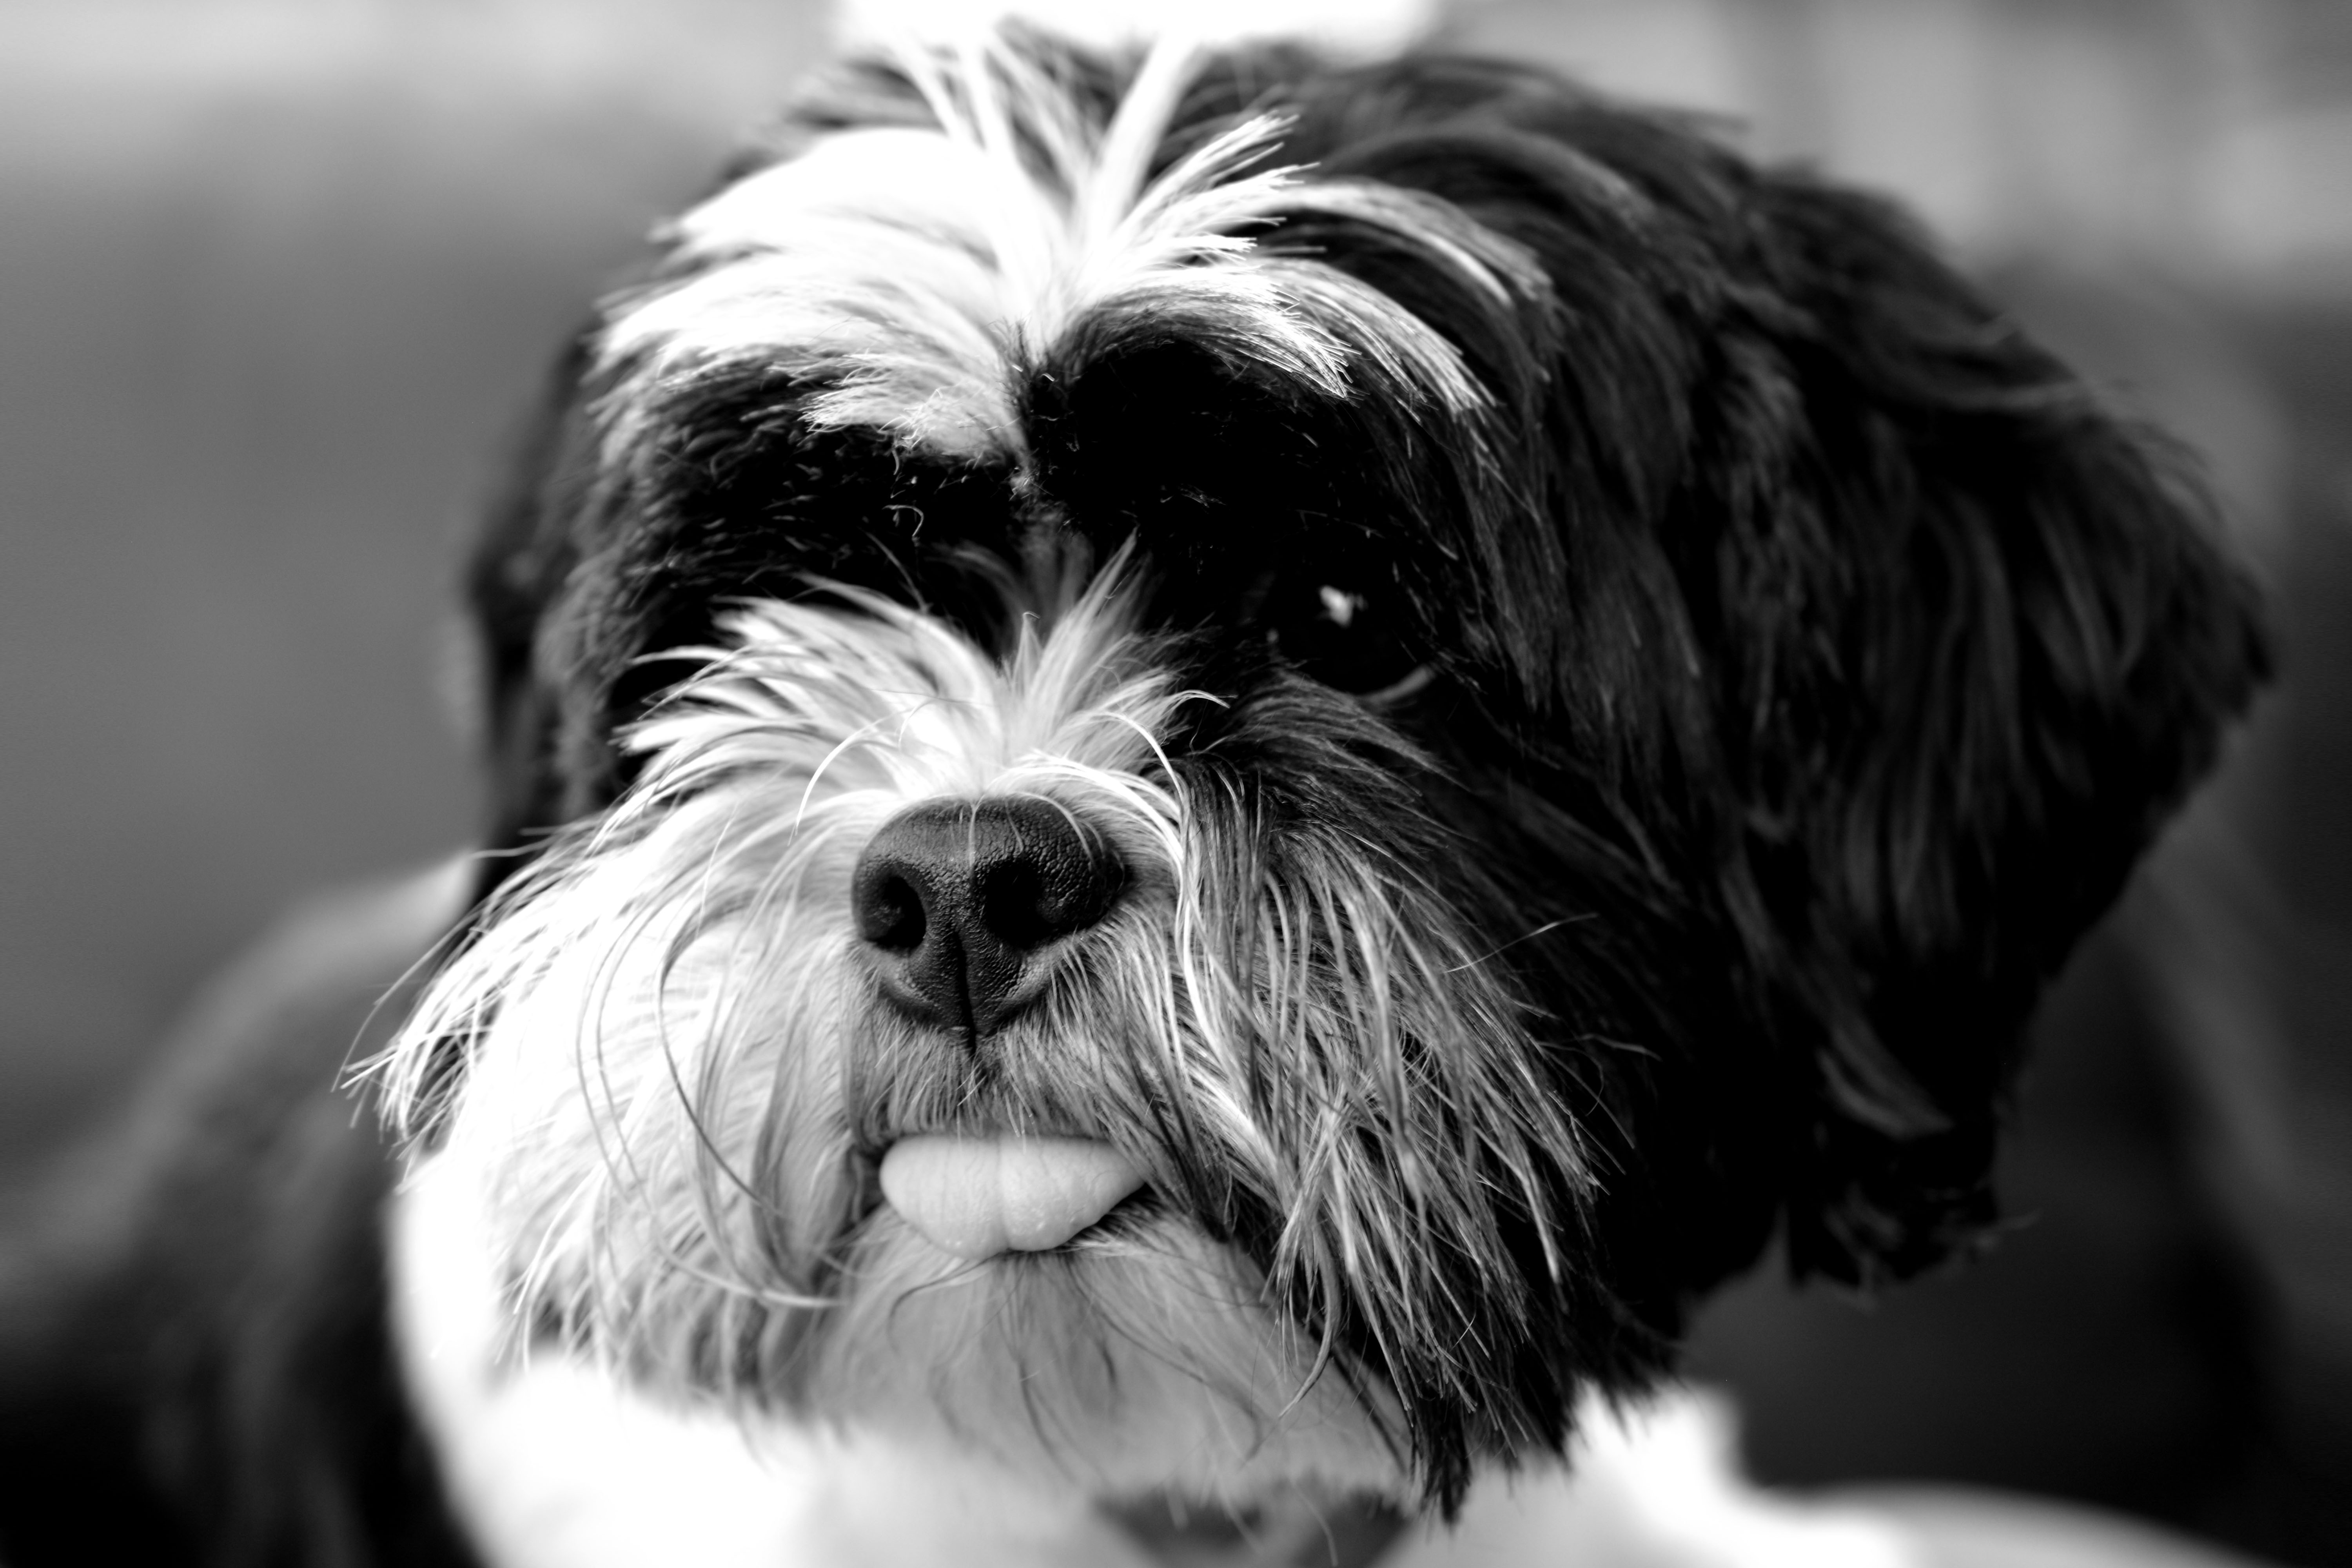 animals, dog, bw, chb, protruding tongue, tongue stuck out, tibetan terrier